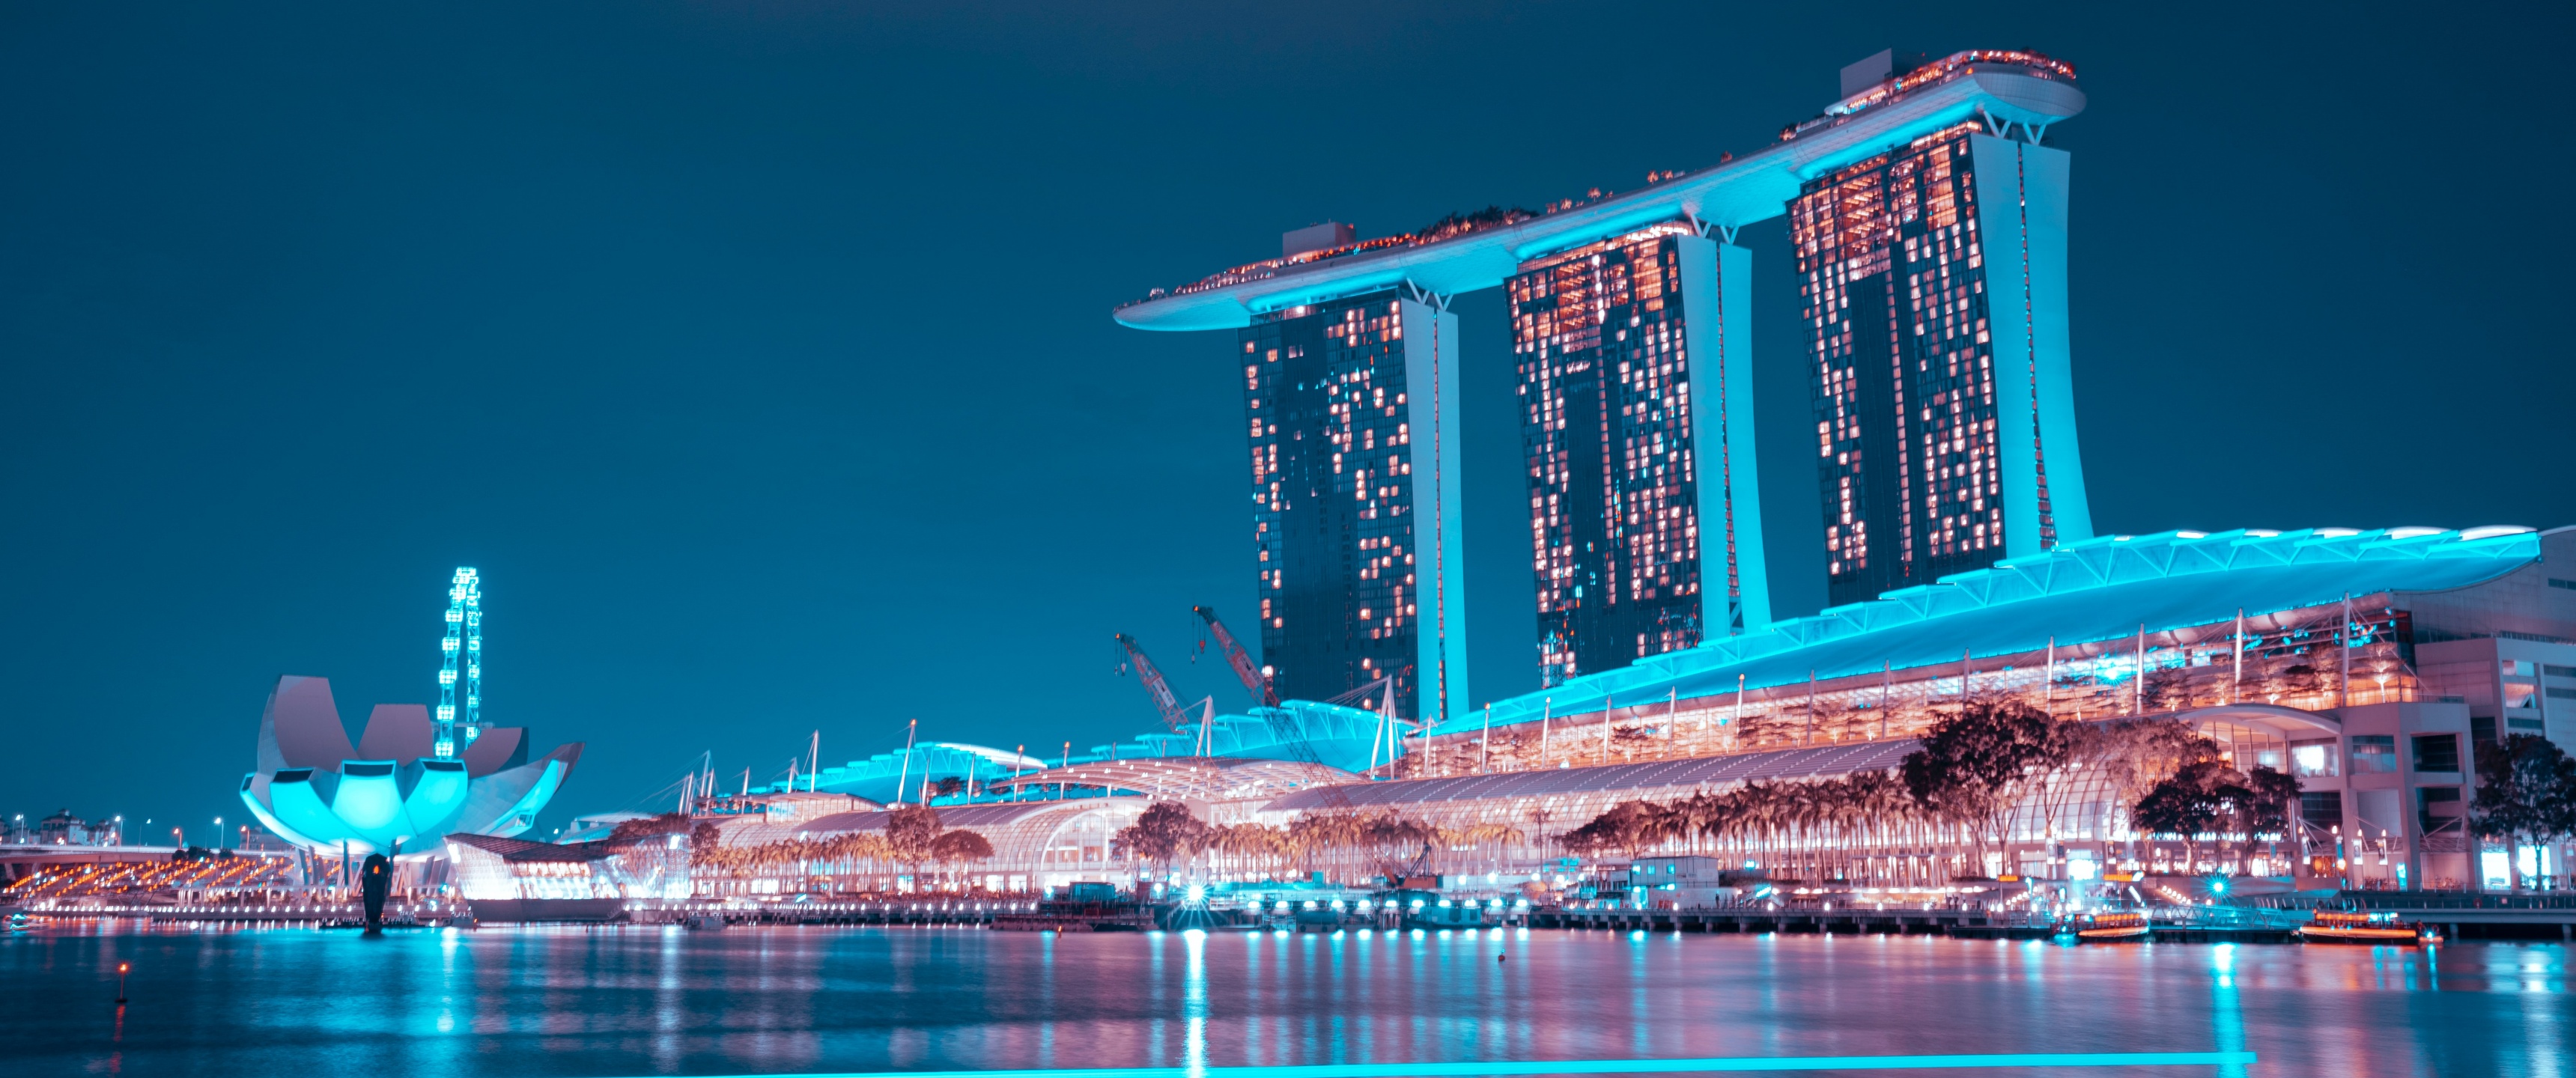 Singapore Travel Wallpaper HD 4K - 2020 APK for Android Download